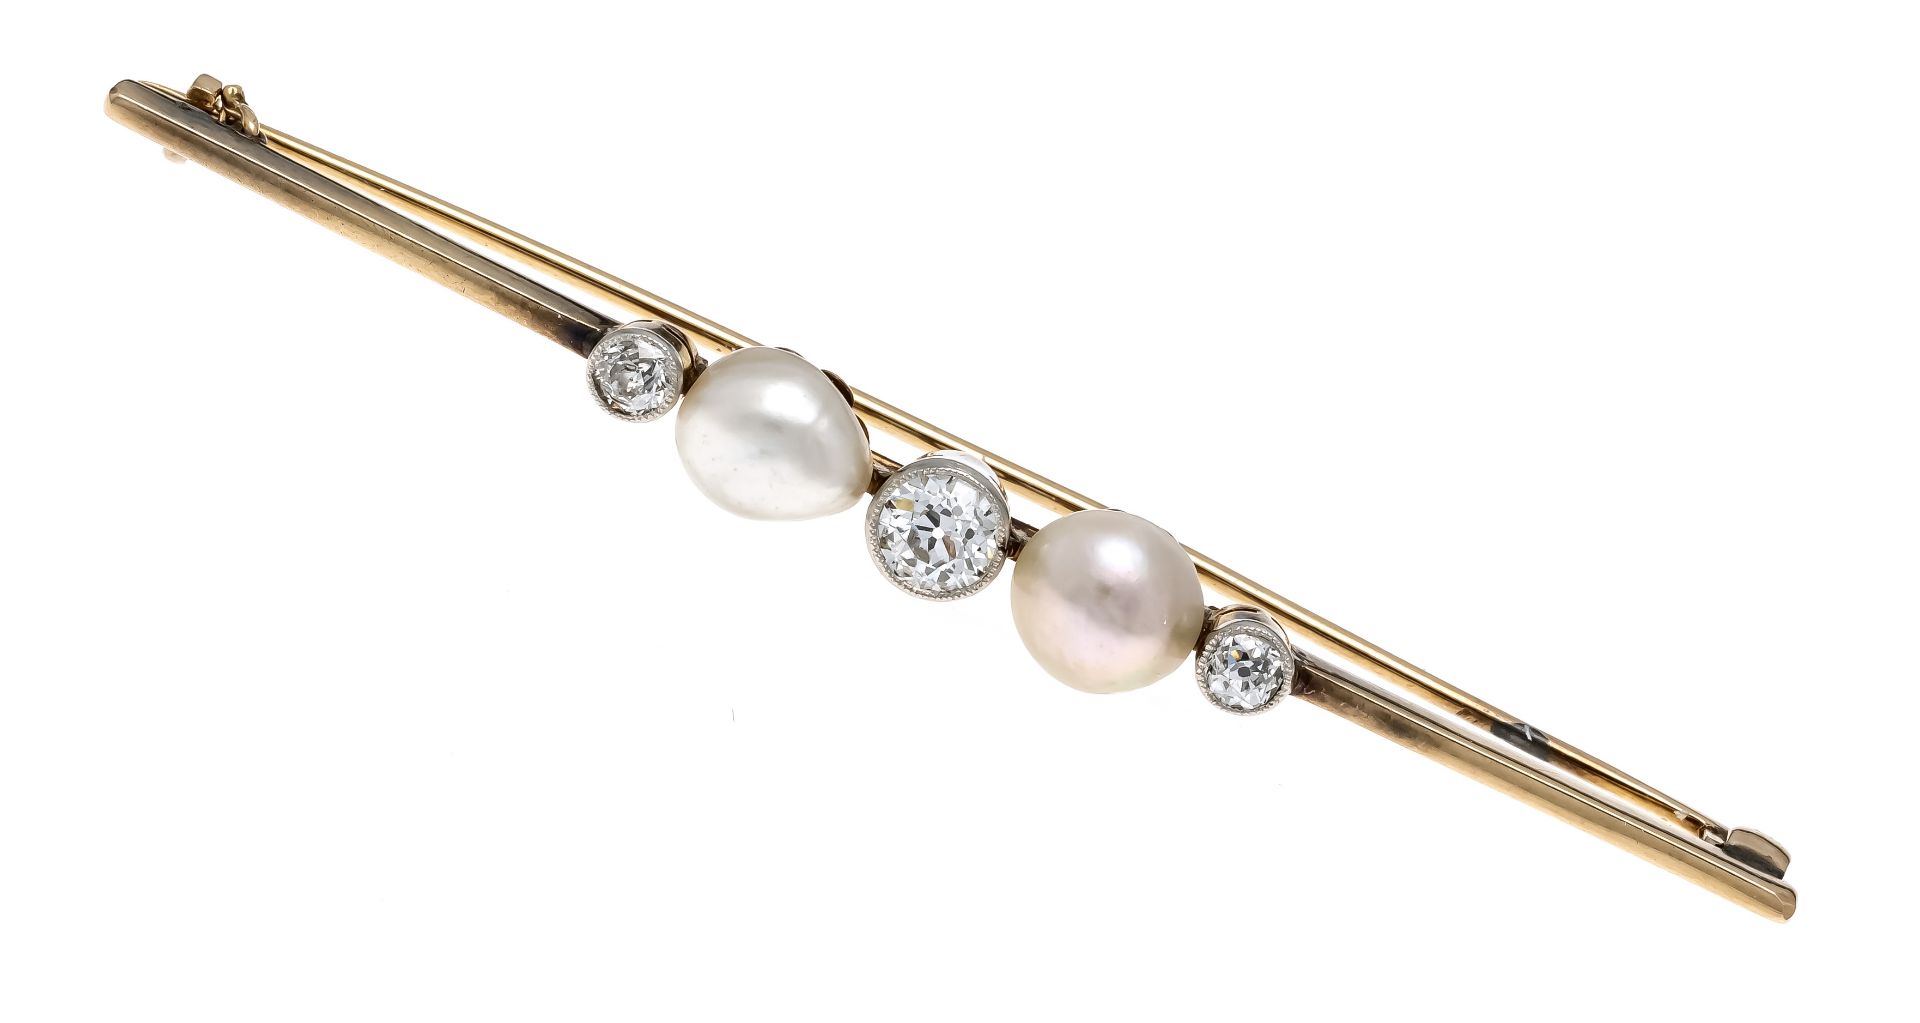 Old-cut diamond pearl pin GG/WG 585/000 with 2 white half pearls 7 - 6 mm and 3 old-cut diamonds,